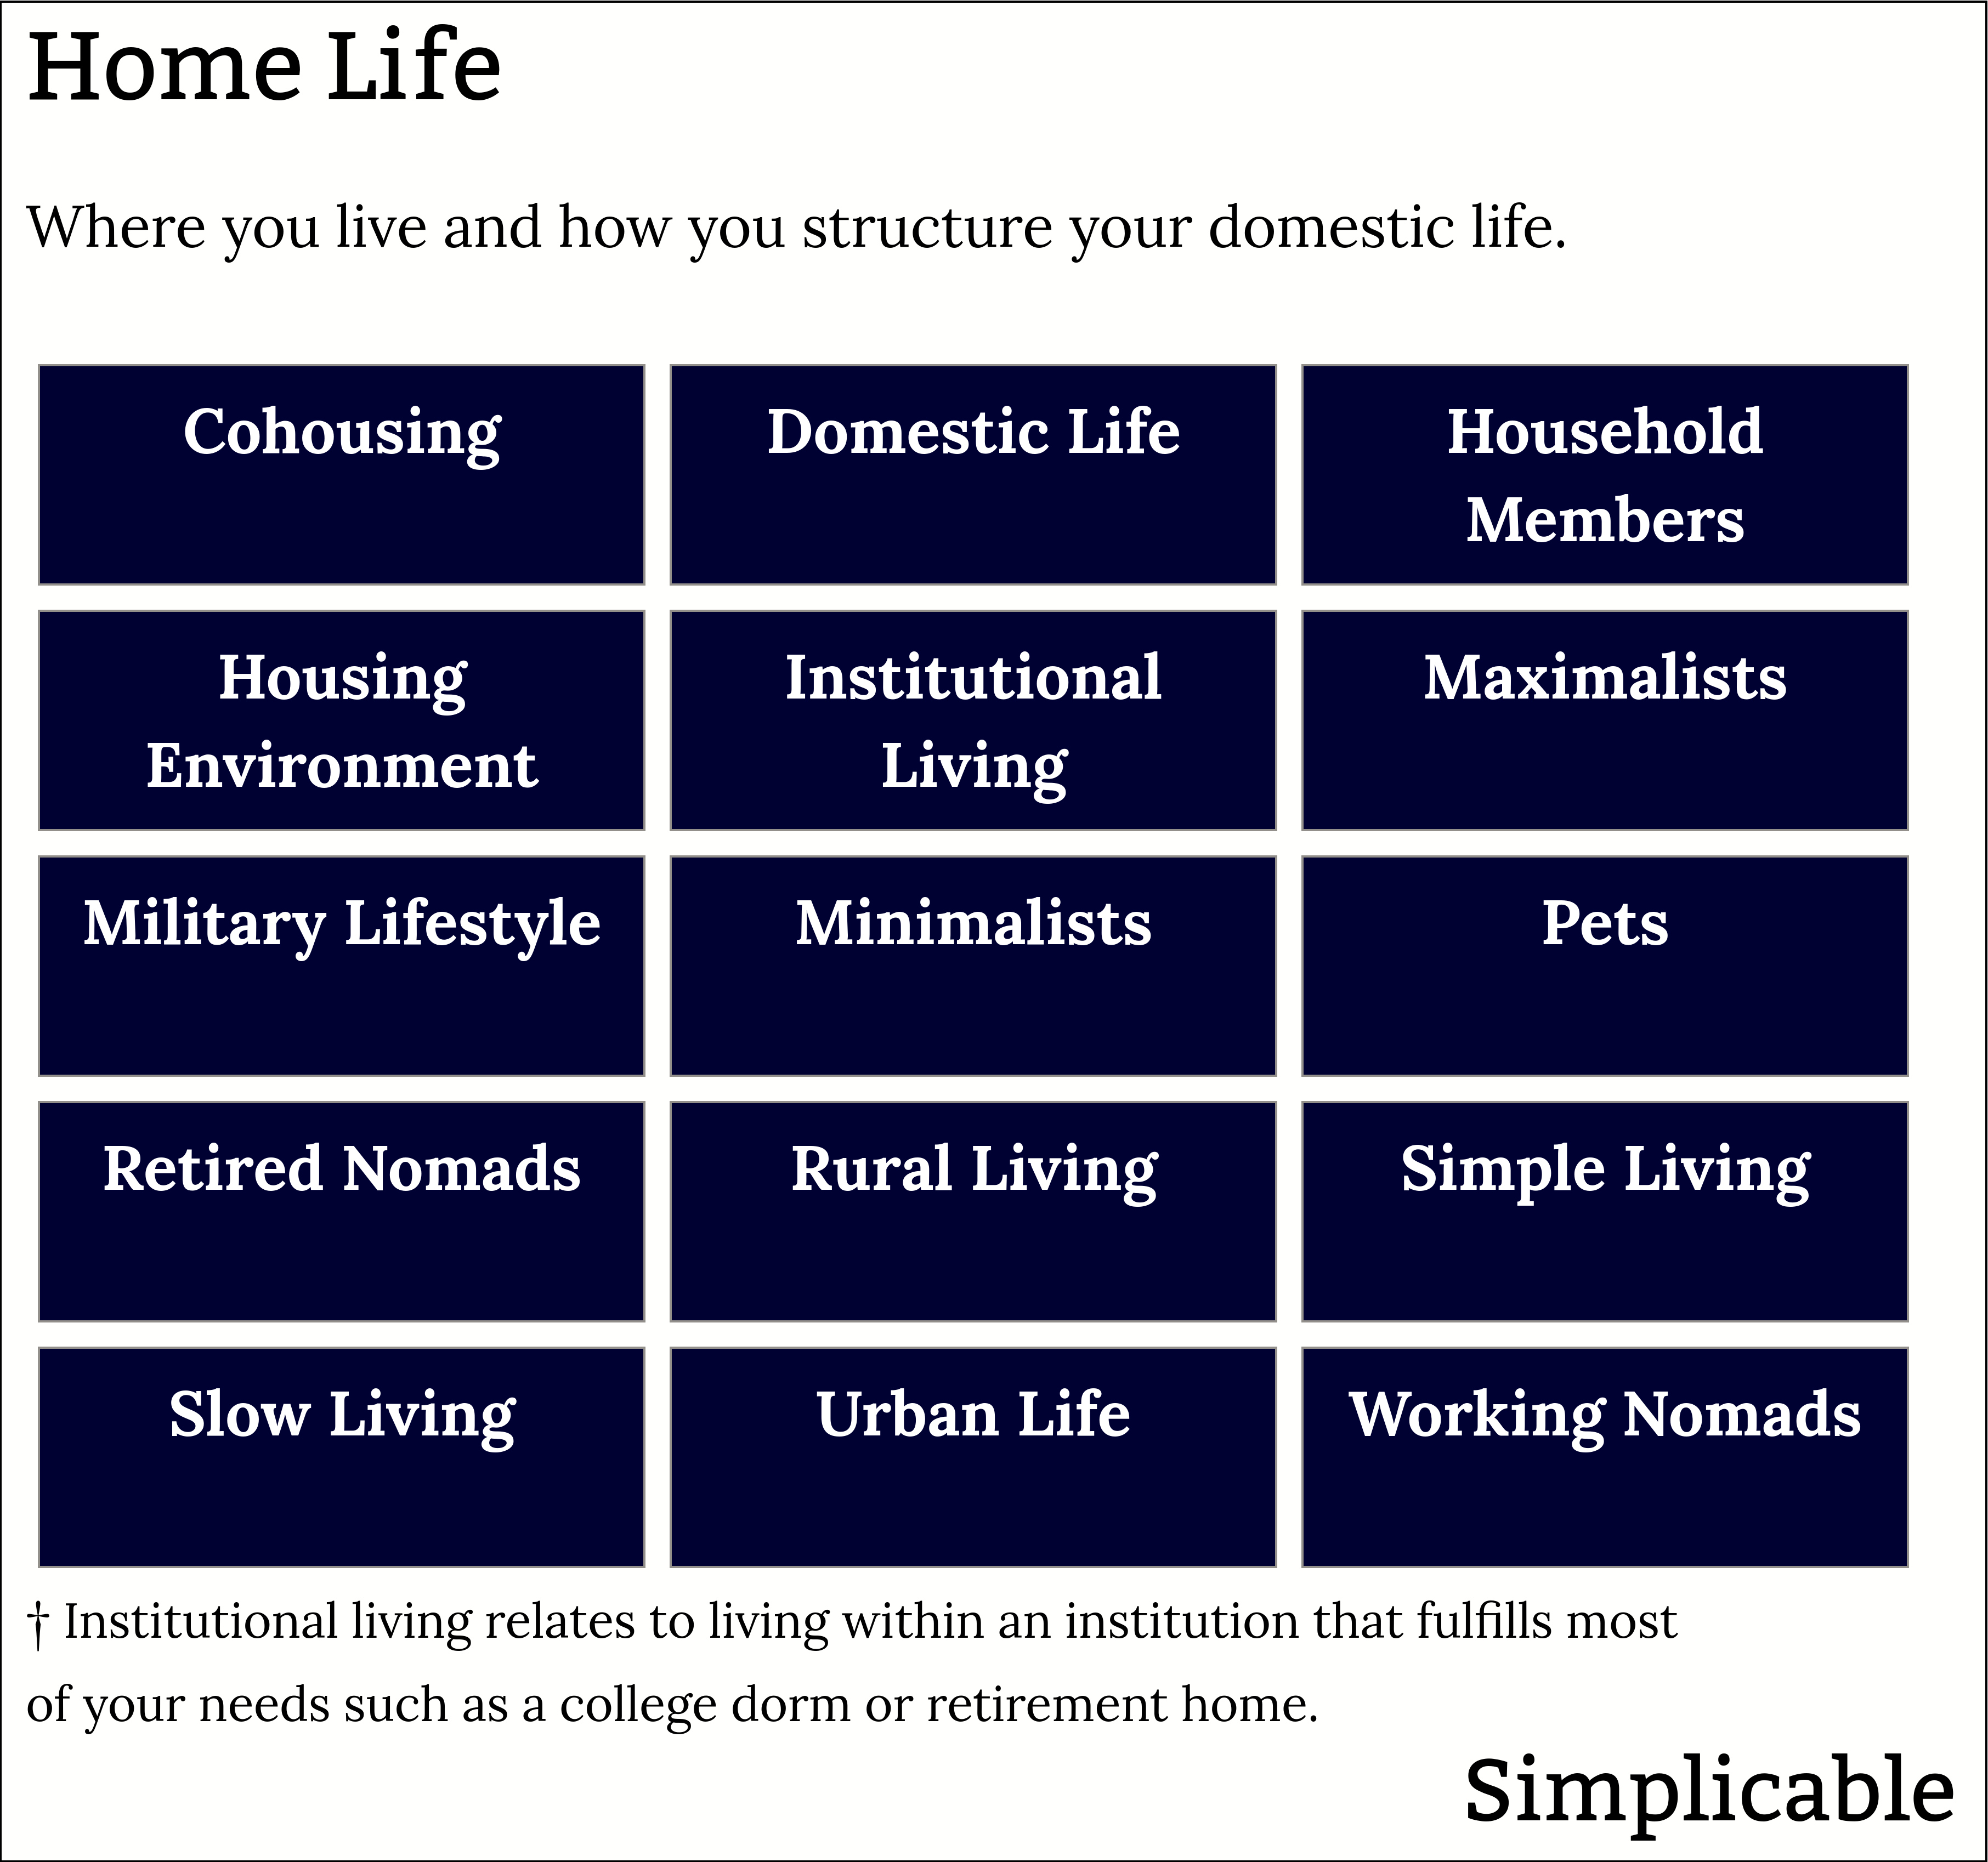 lifestyles related to home life